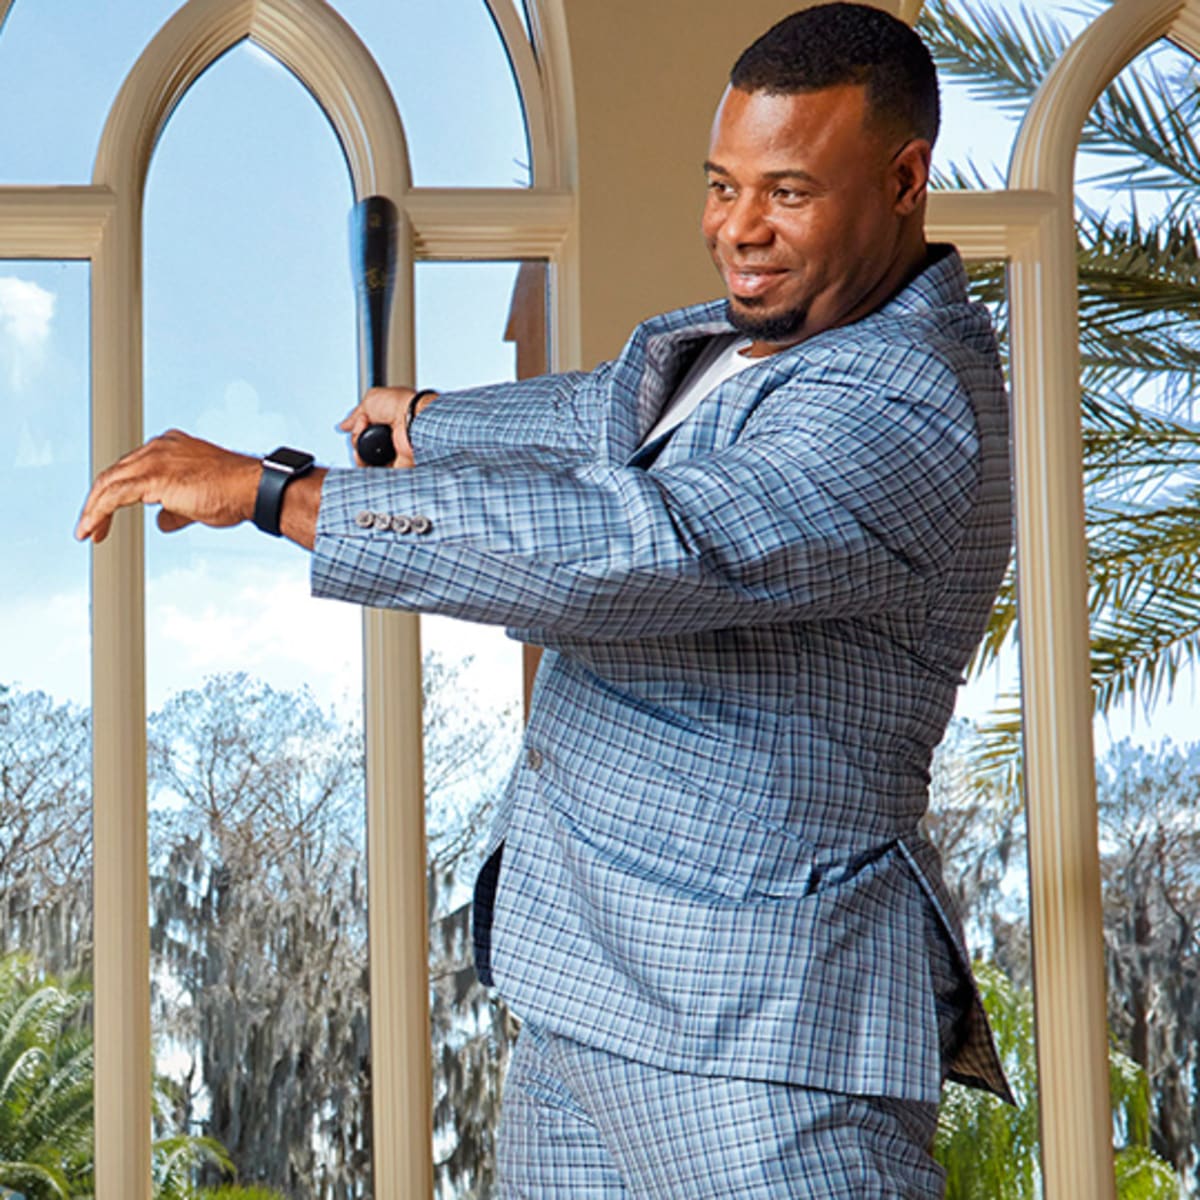 Michael Rosenberg: After many years, Ken Griffey Jr. has managed